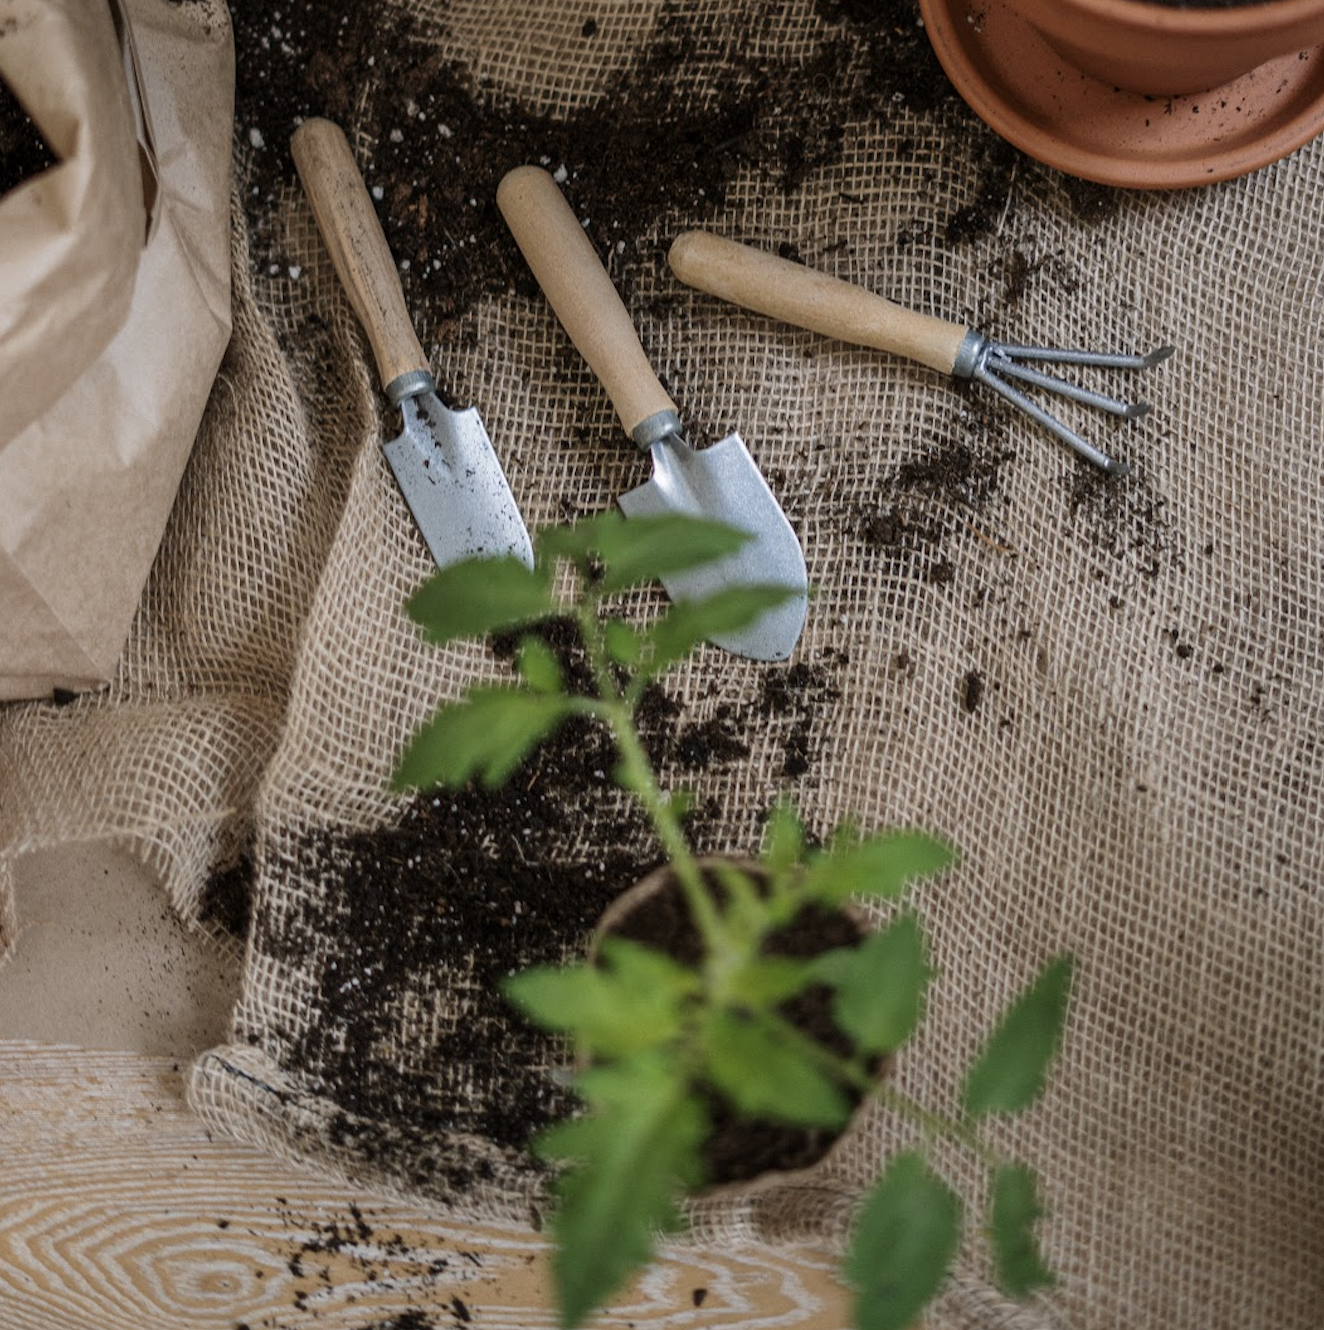 Gardening Tools and Soil from Pexels